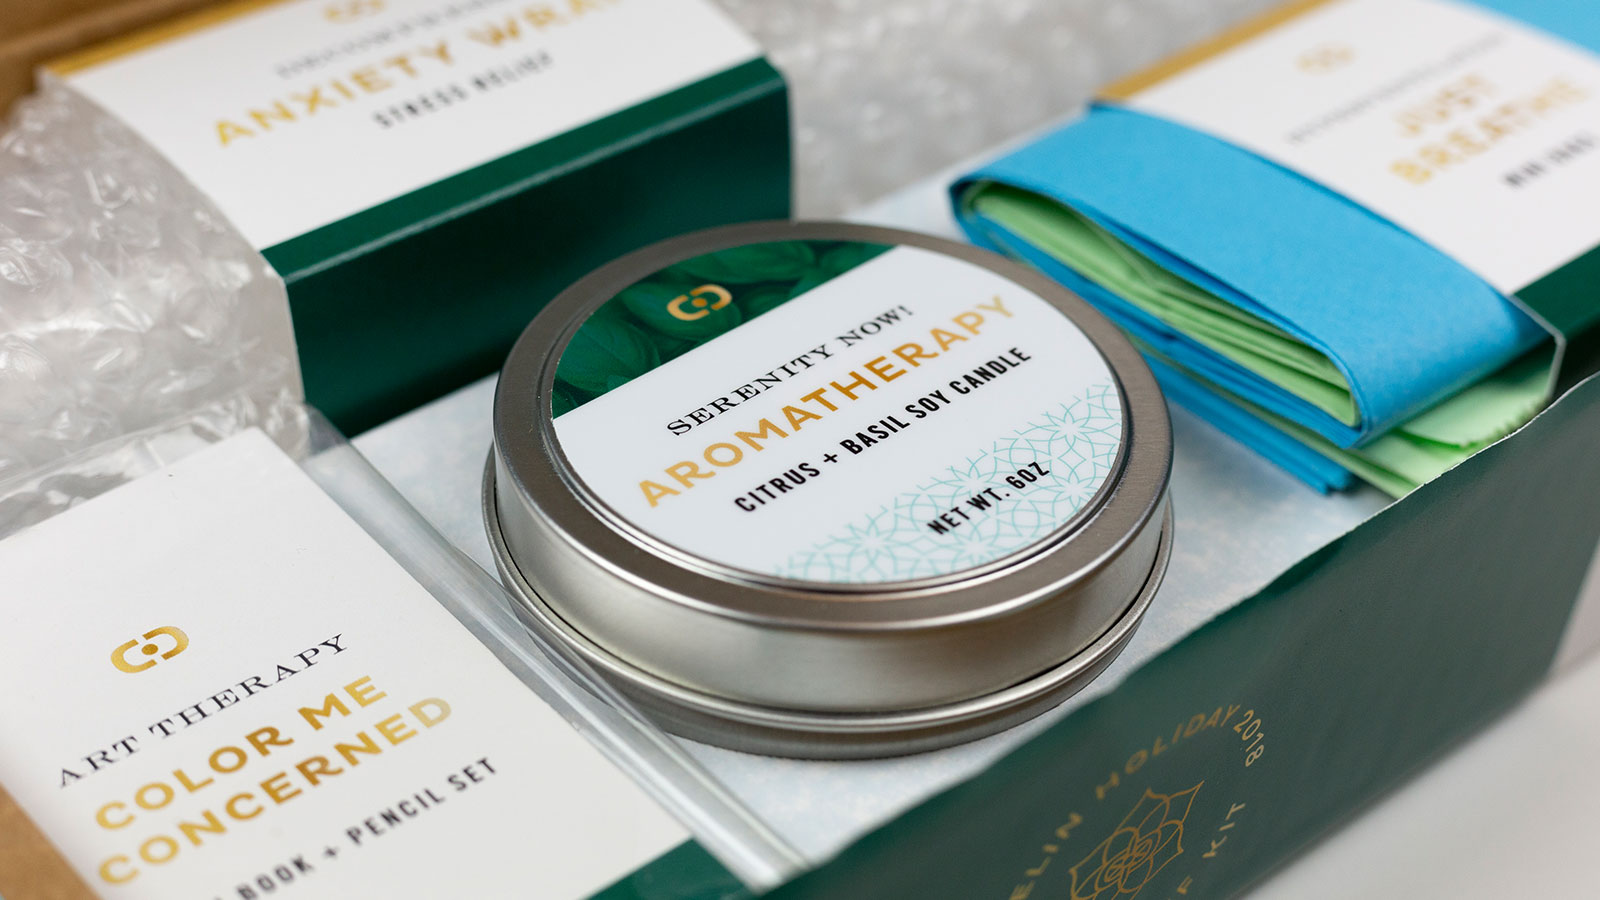 Delin Design Holiday 2018 Stress Kit Direct-Mail Promotion: "Serenity Now!" Citrus Basil Candle Detail